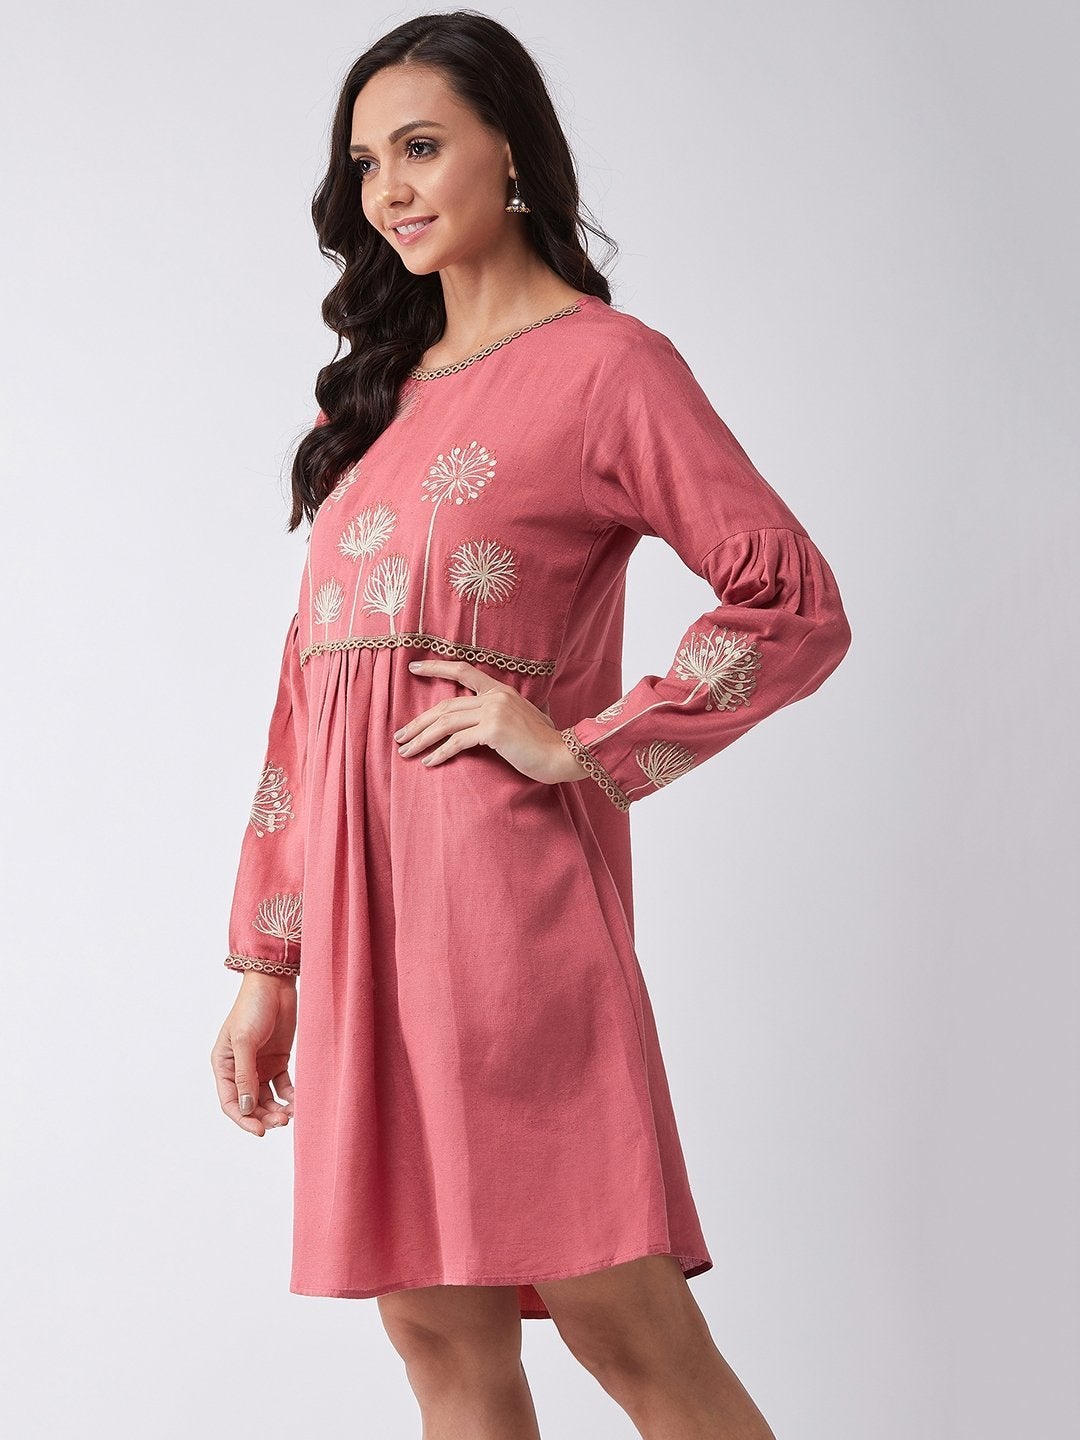 Women's Luscious Red Embroidered Dress - InWeave